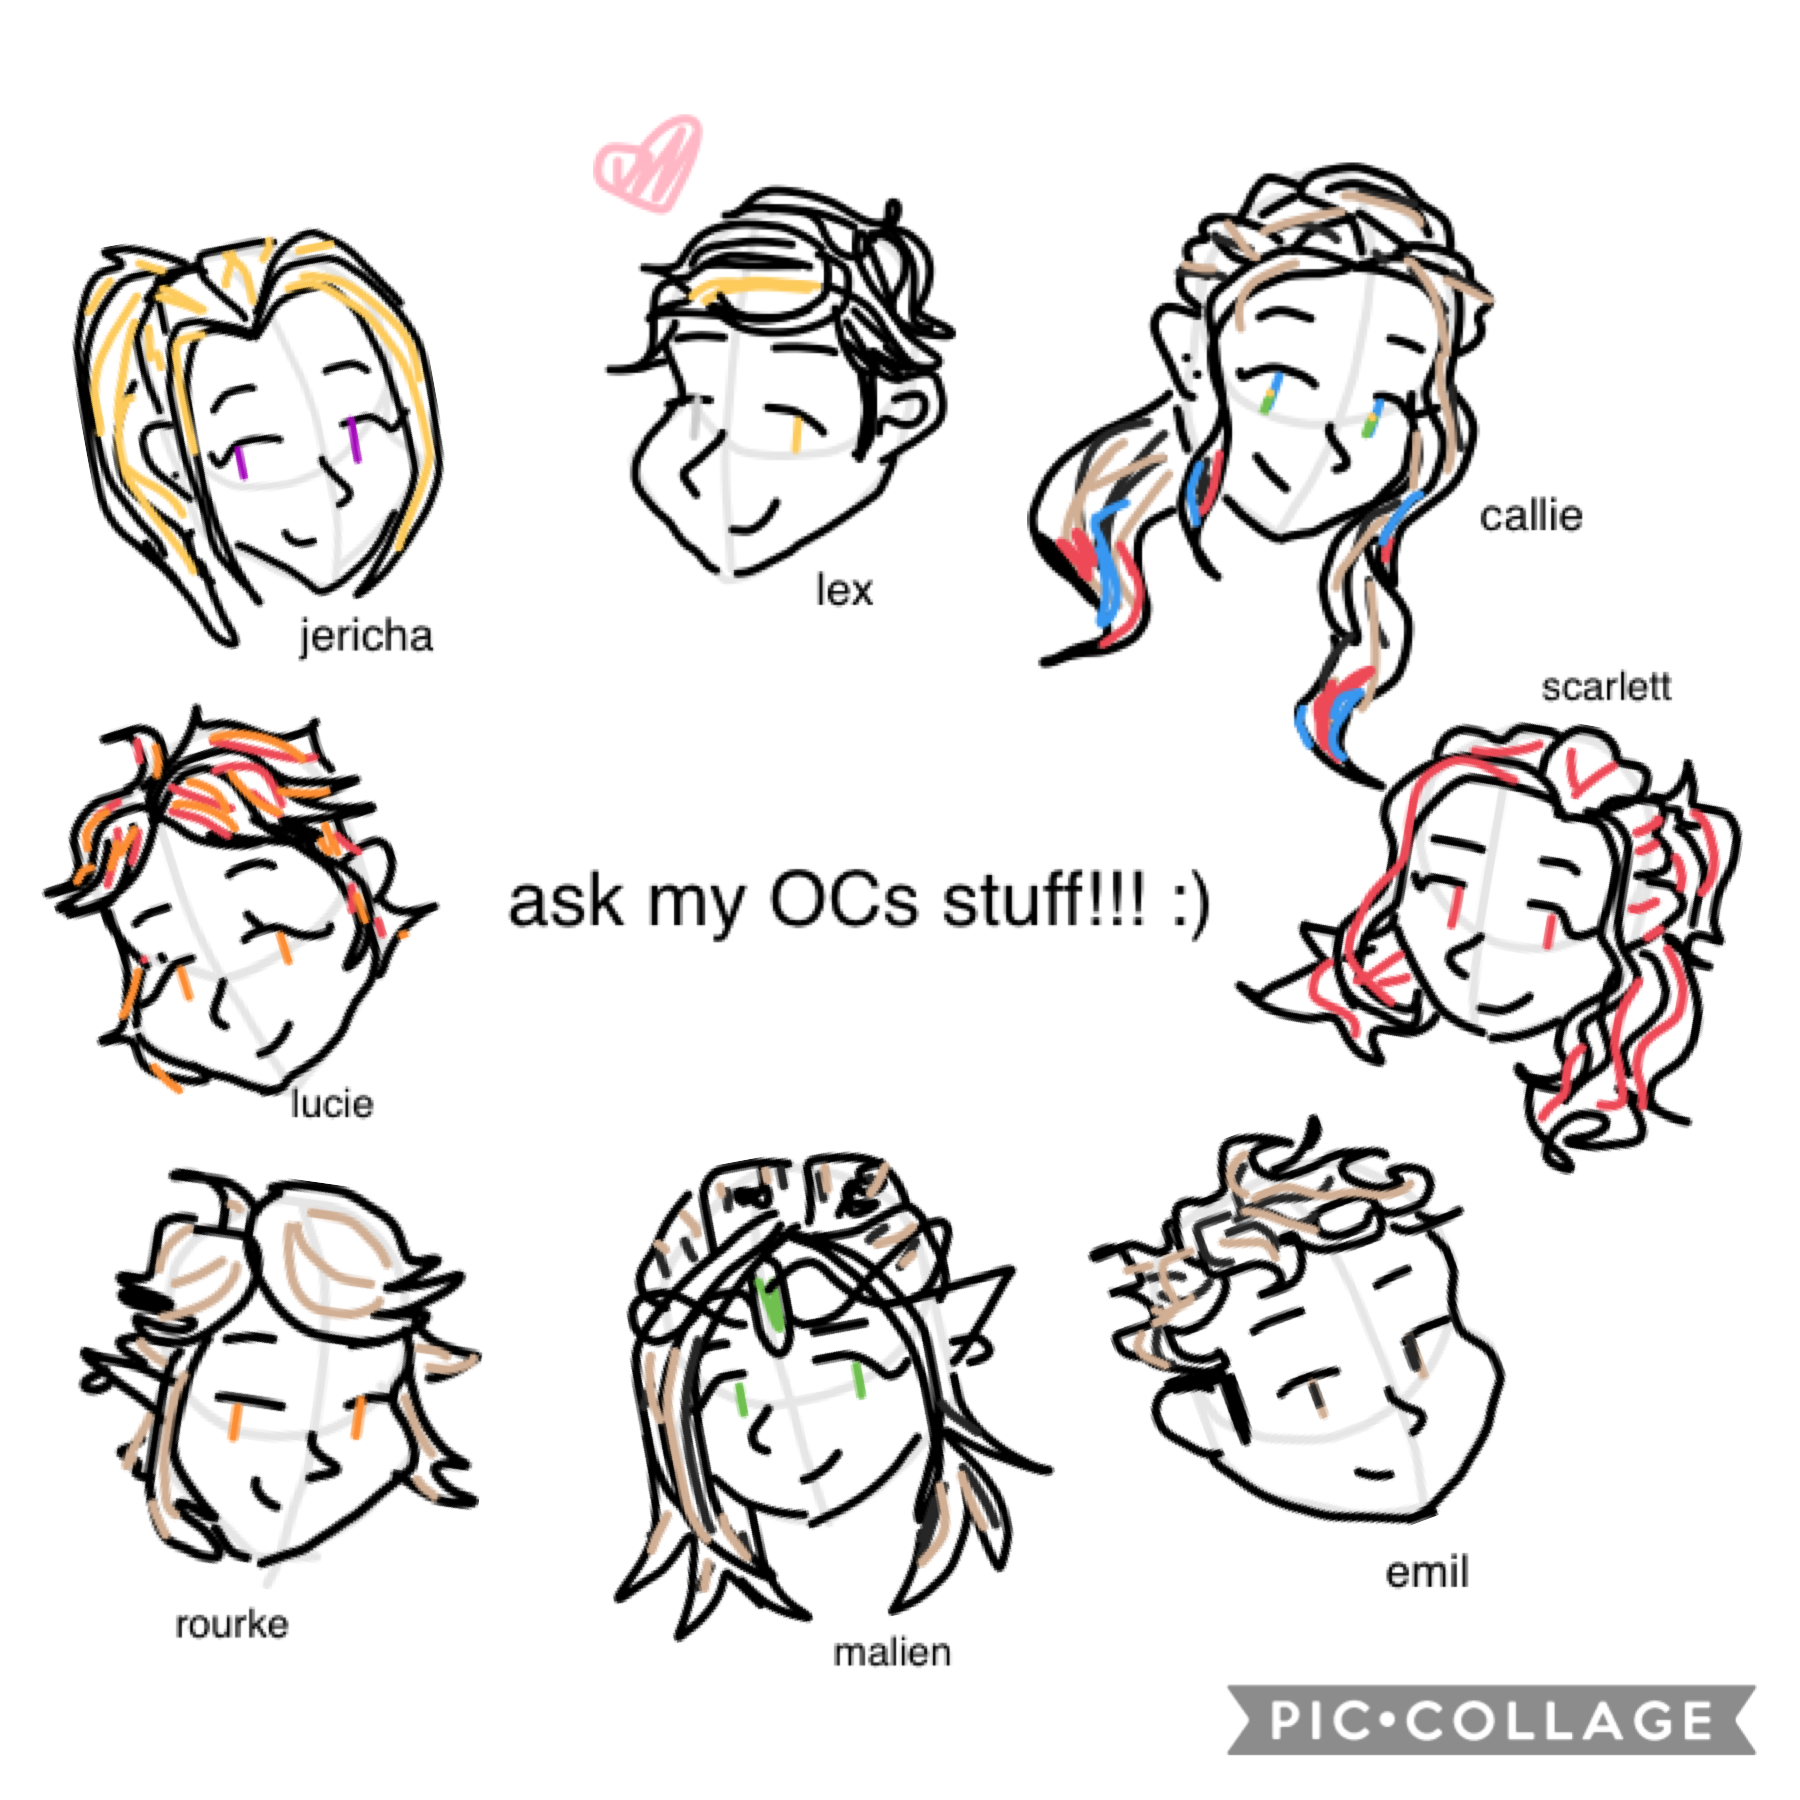 tap :)

I’m bored so here. You can ask any of my OCs, not just these ones. You can ask them about relationships, their lives, adventures, etc. Ask away :)